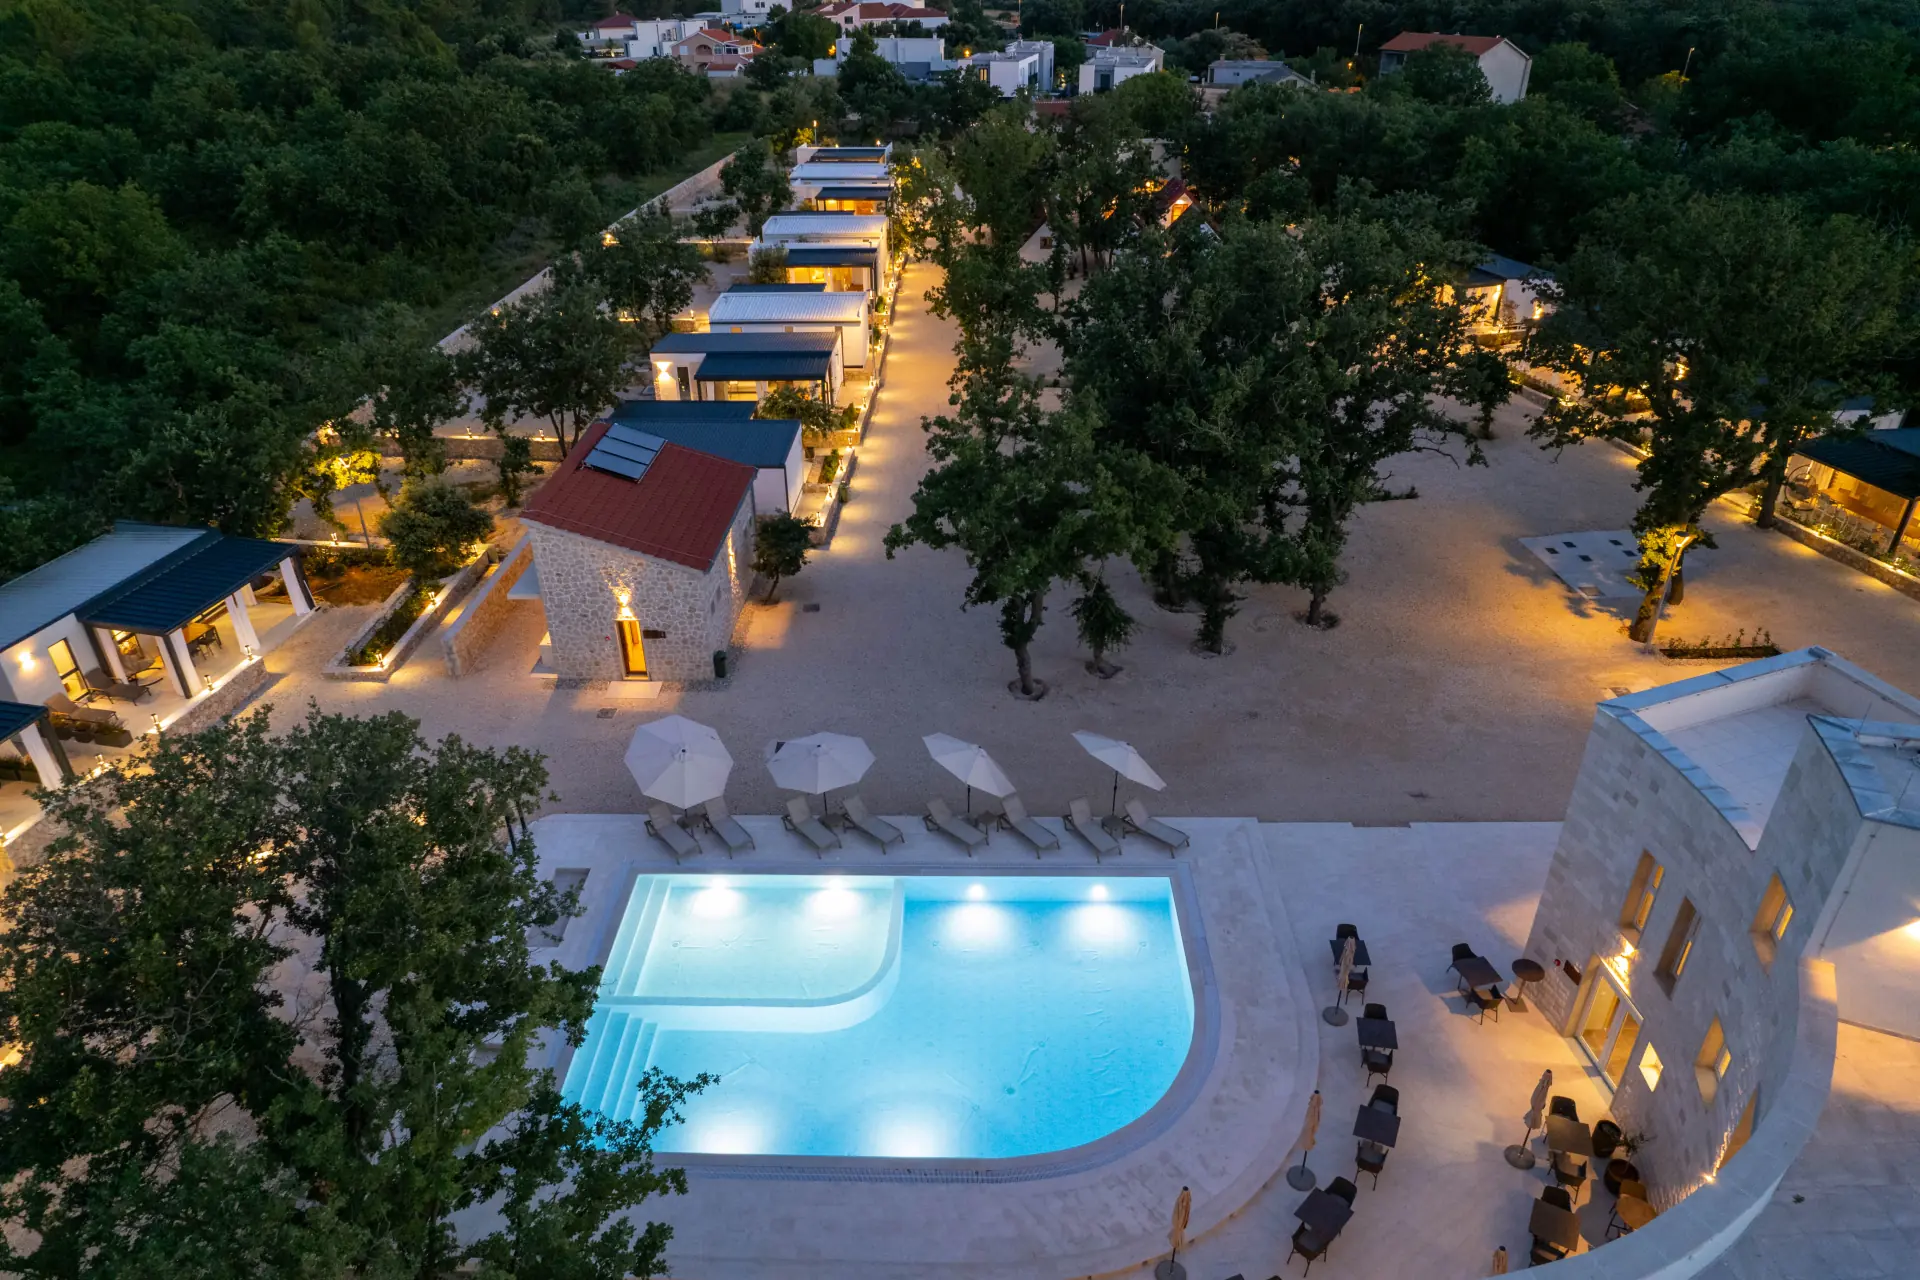 Aerial view of a swimming pool in a campground at night surrounded by trees and buildings. The swimming pool is clear blue and the buildings are mostly dark. The trees are green and some of them have lights on. This image is from Dionis Camping Zaton, a campground in Zaton, Croatia.